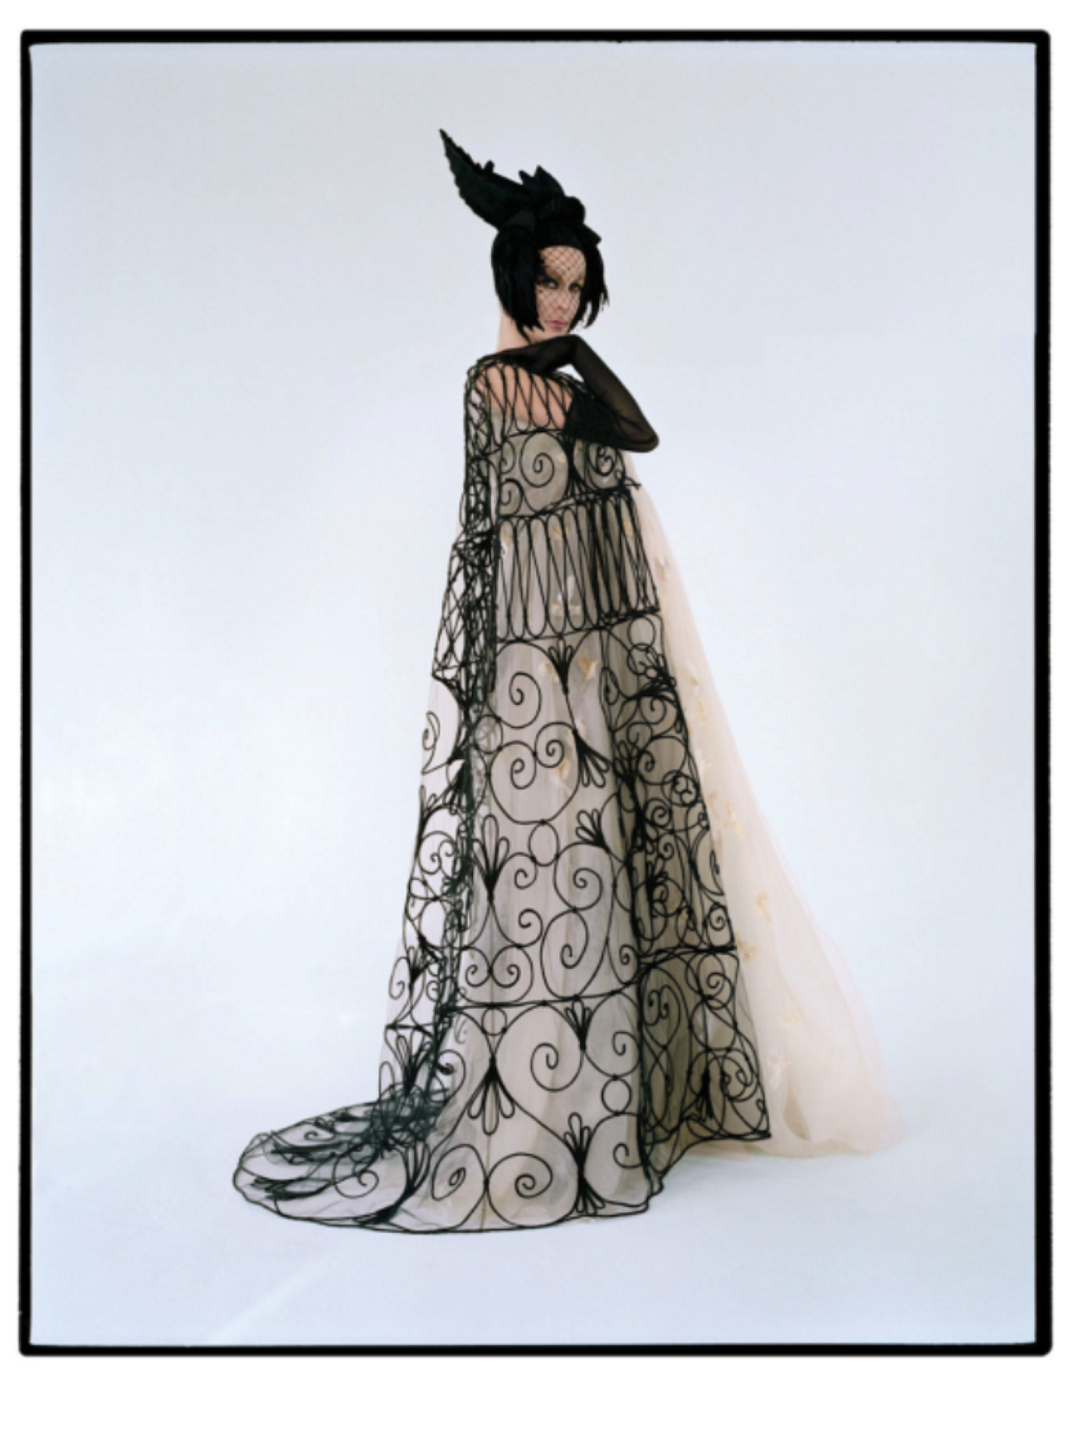 Evening gown created by Valentino Garavani in the 1960s.